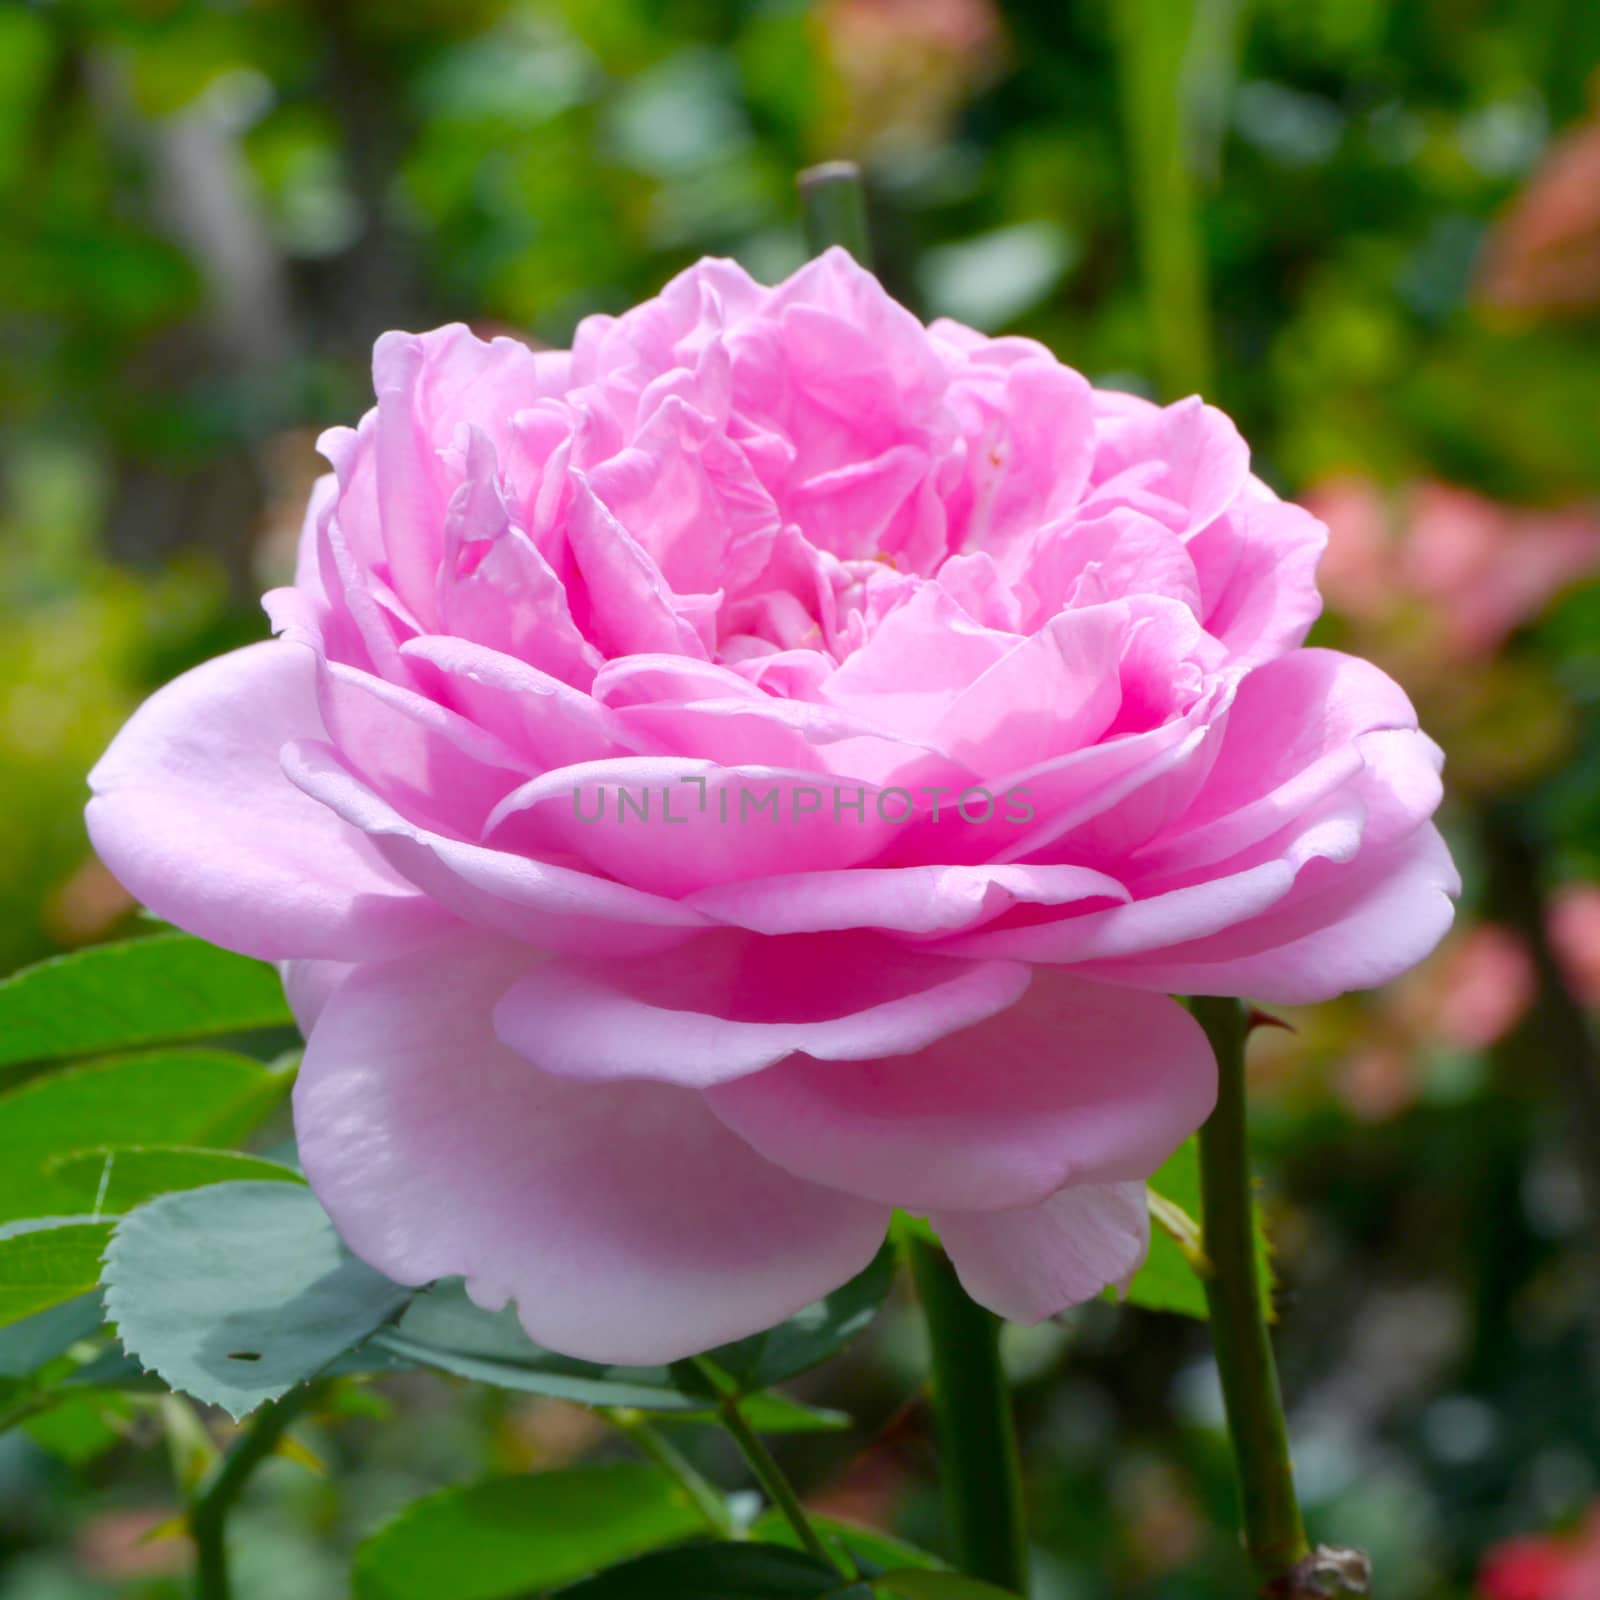 Pink rose in the garden by Noppharat_th